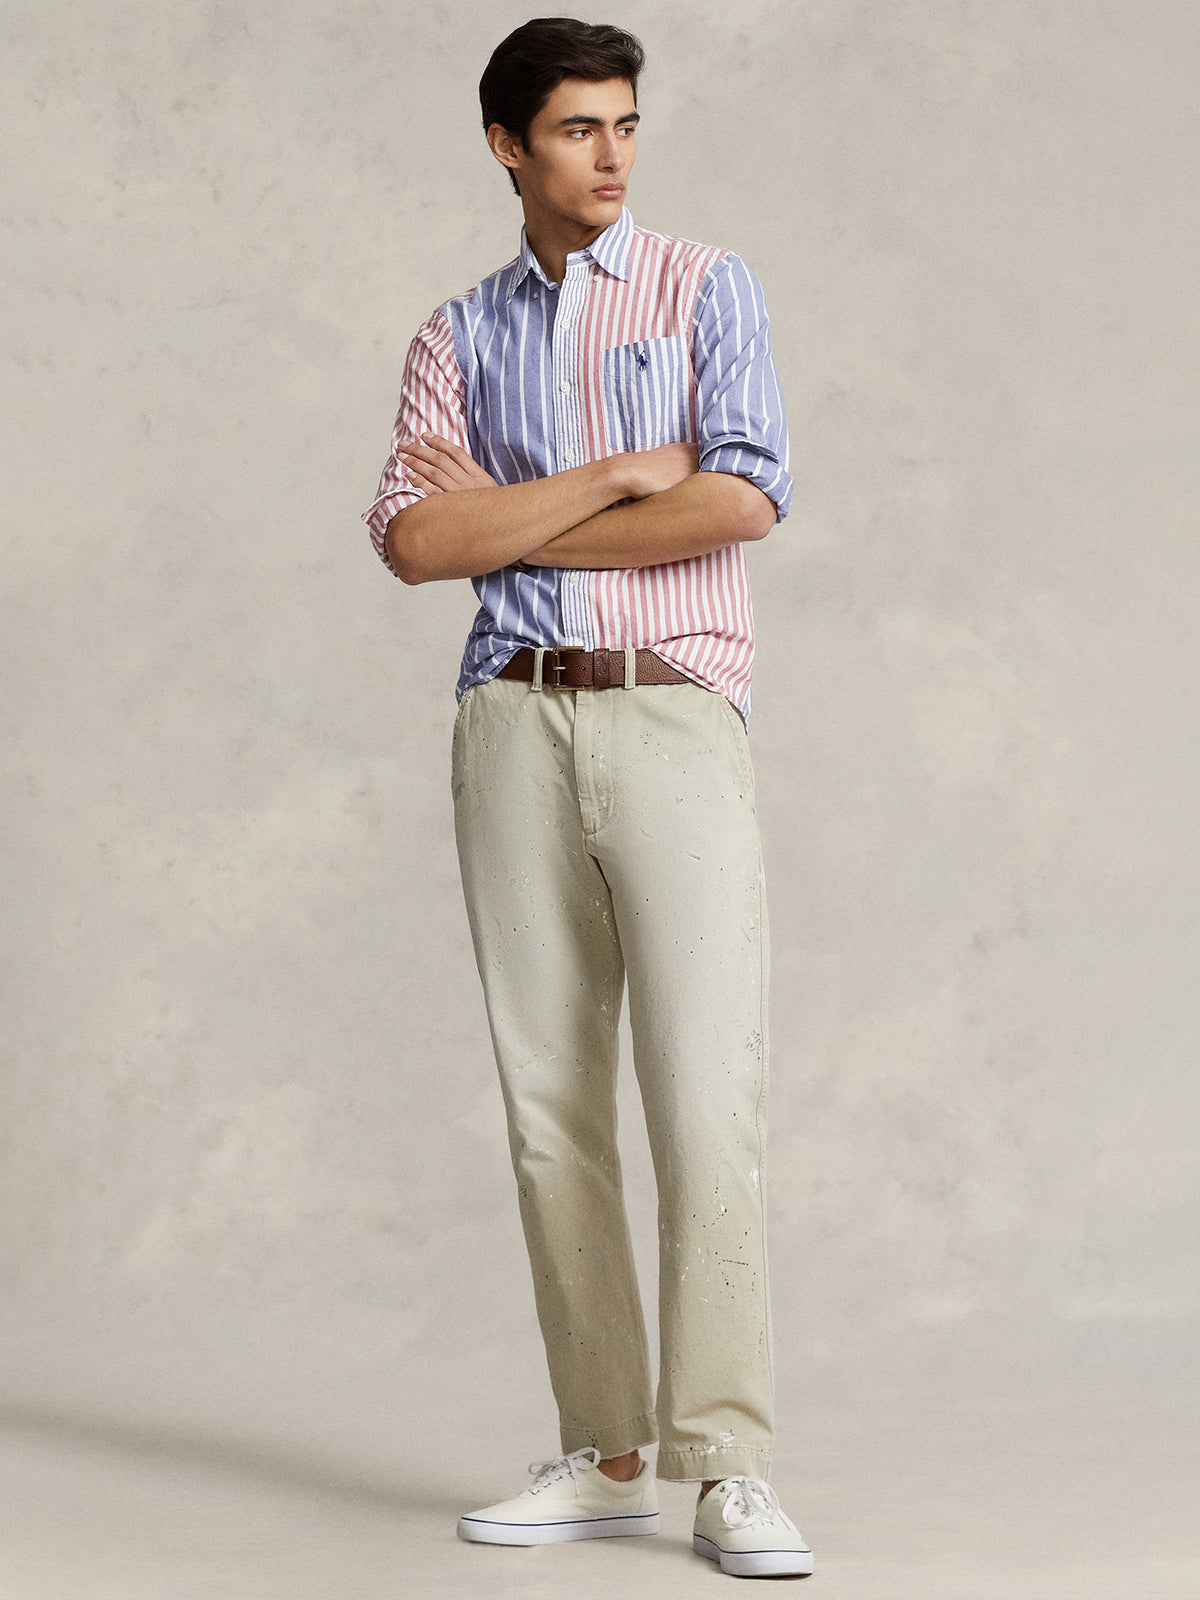 Classic Custom-Fit Oxford Shirt in White, Red &amp; Navy Stripe